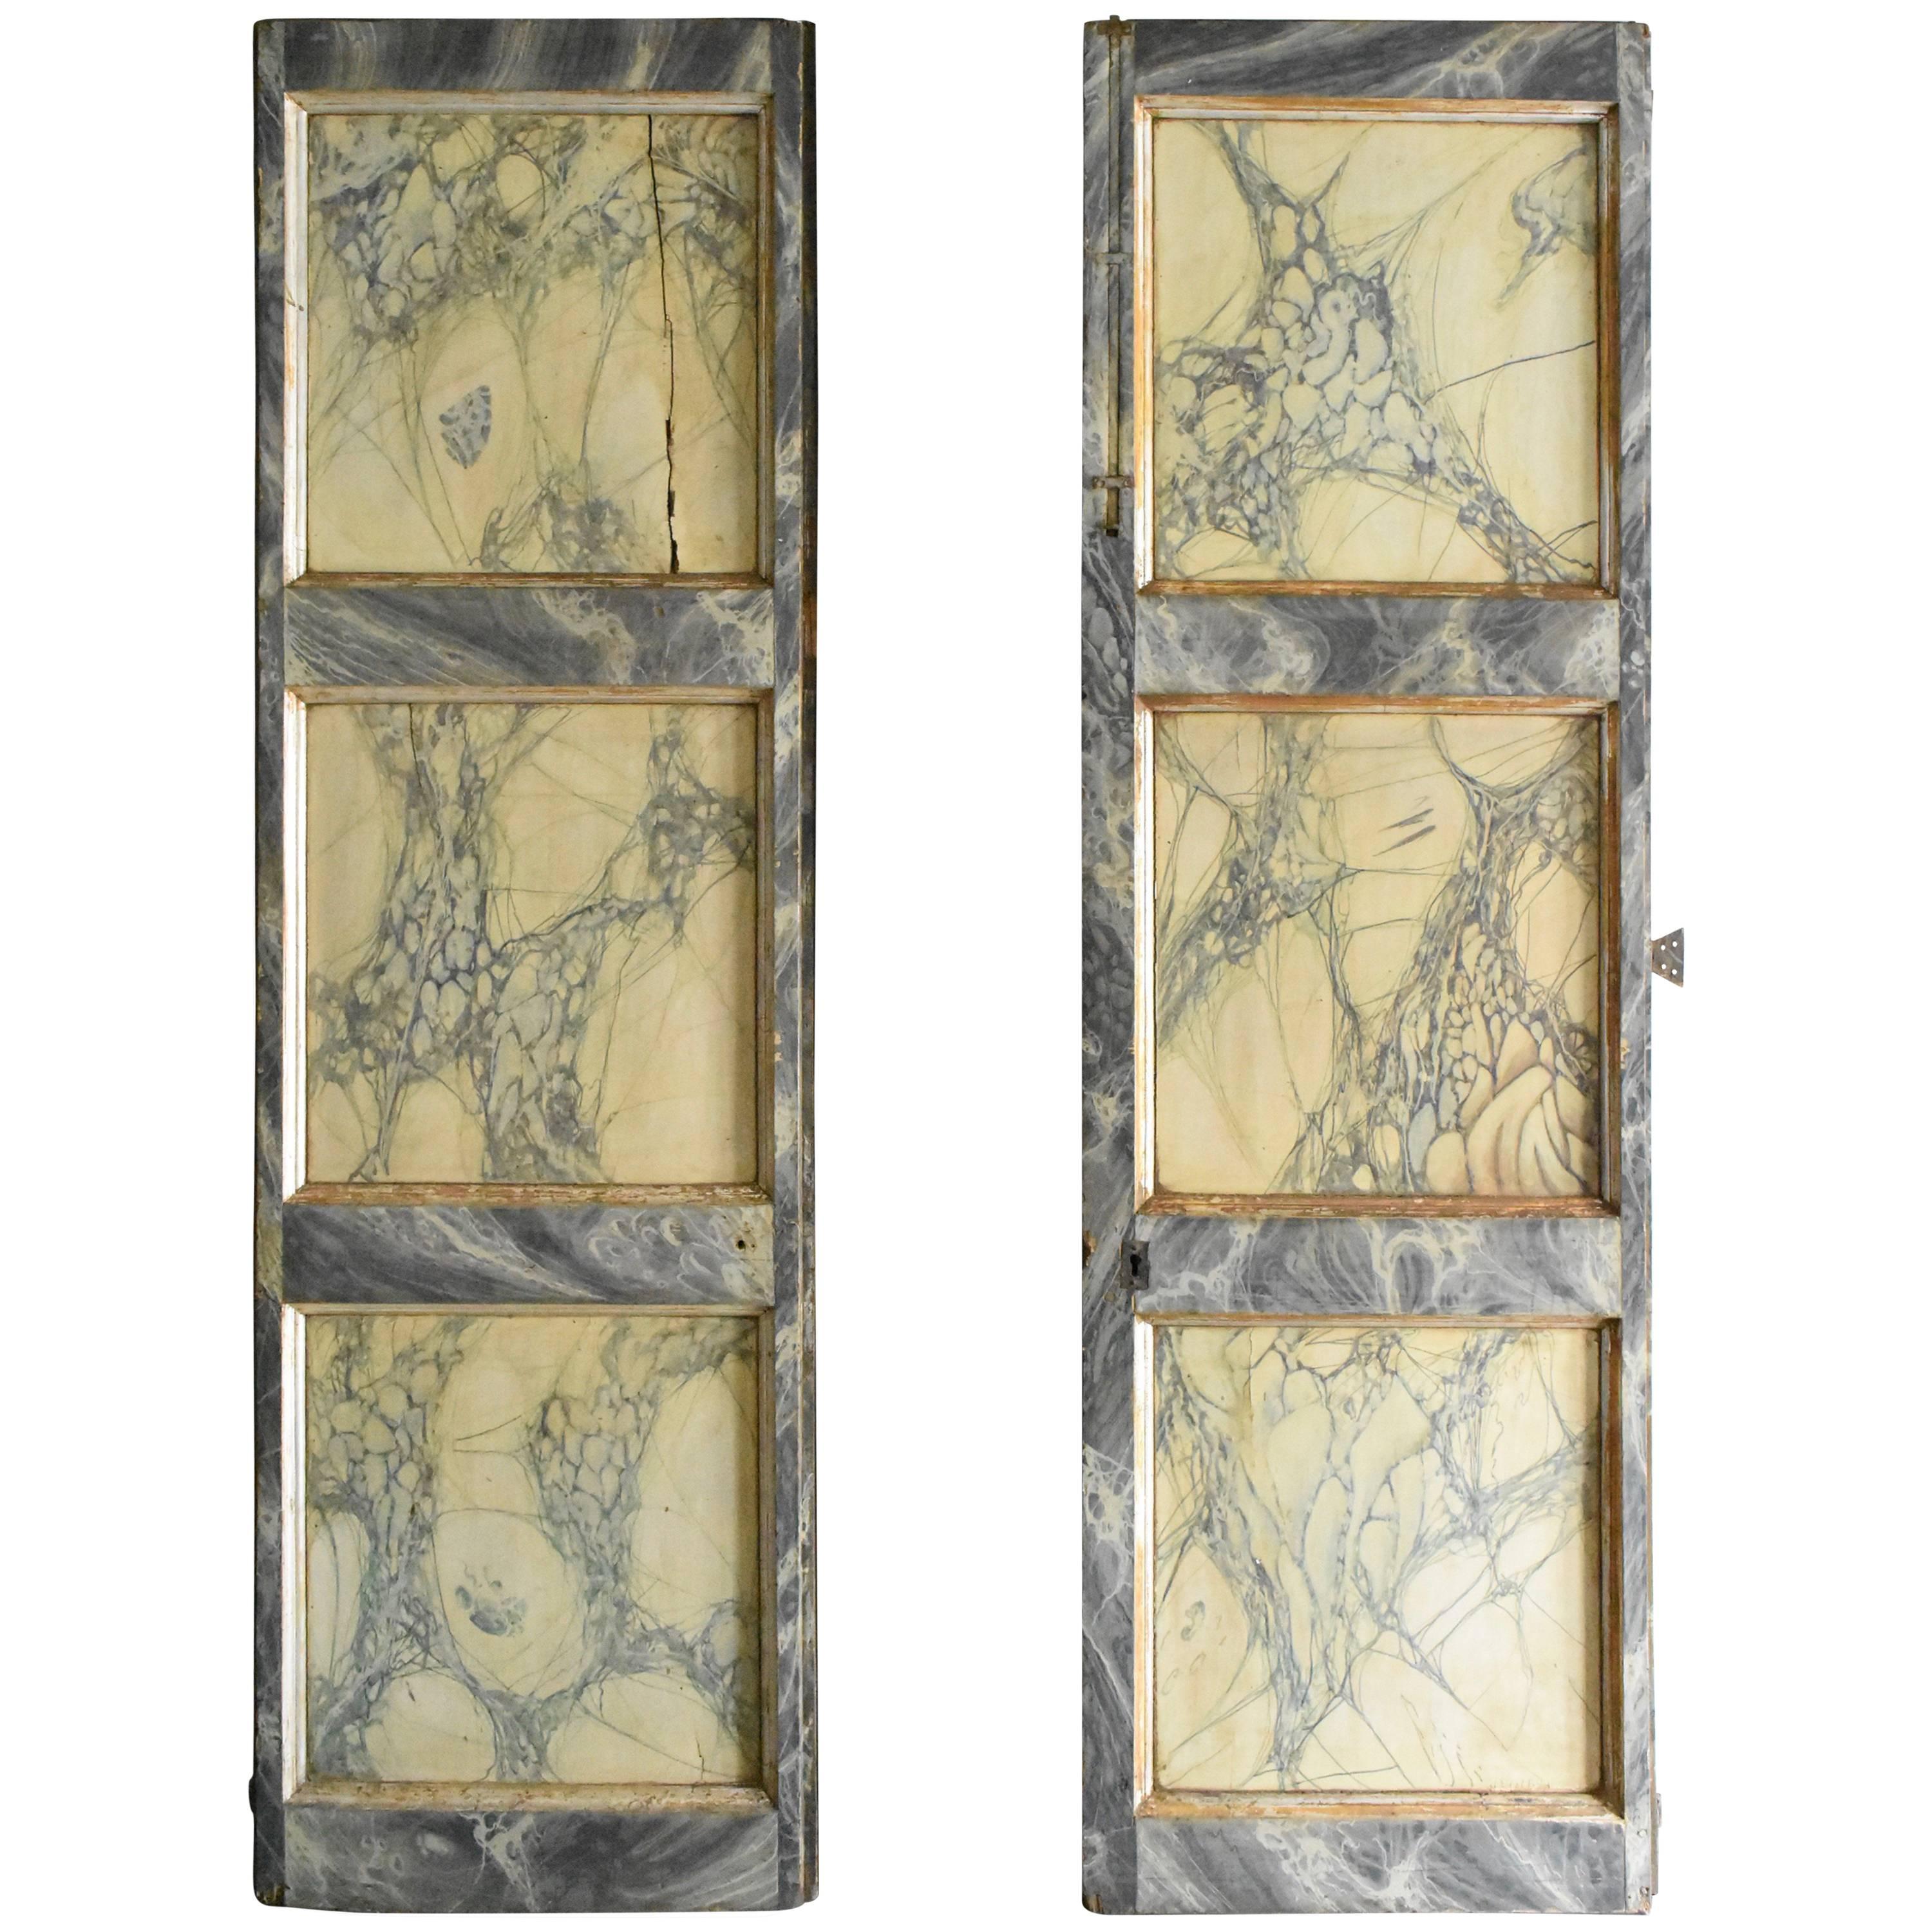 Late 18th Century Italian Faux Marble and Silver Leaf Doors